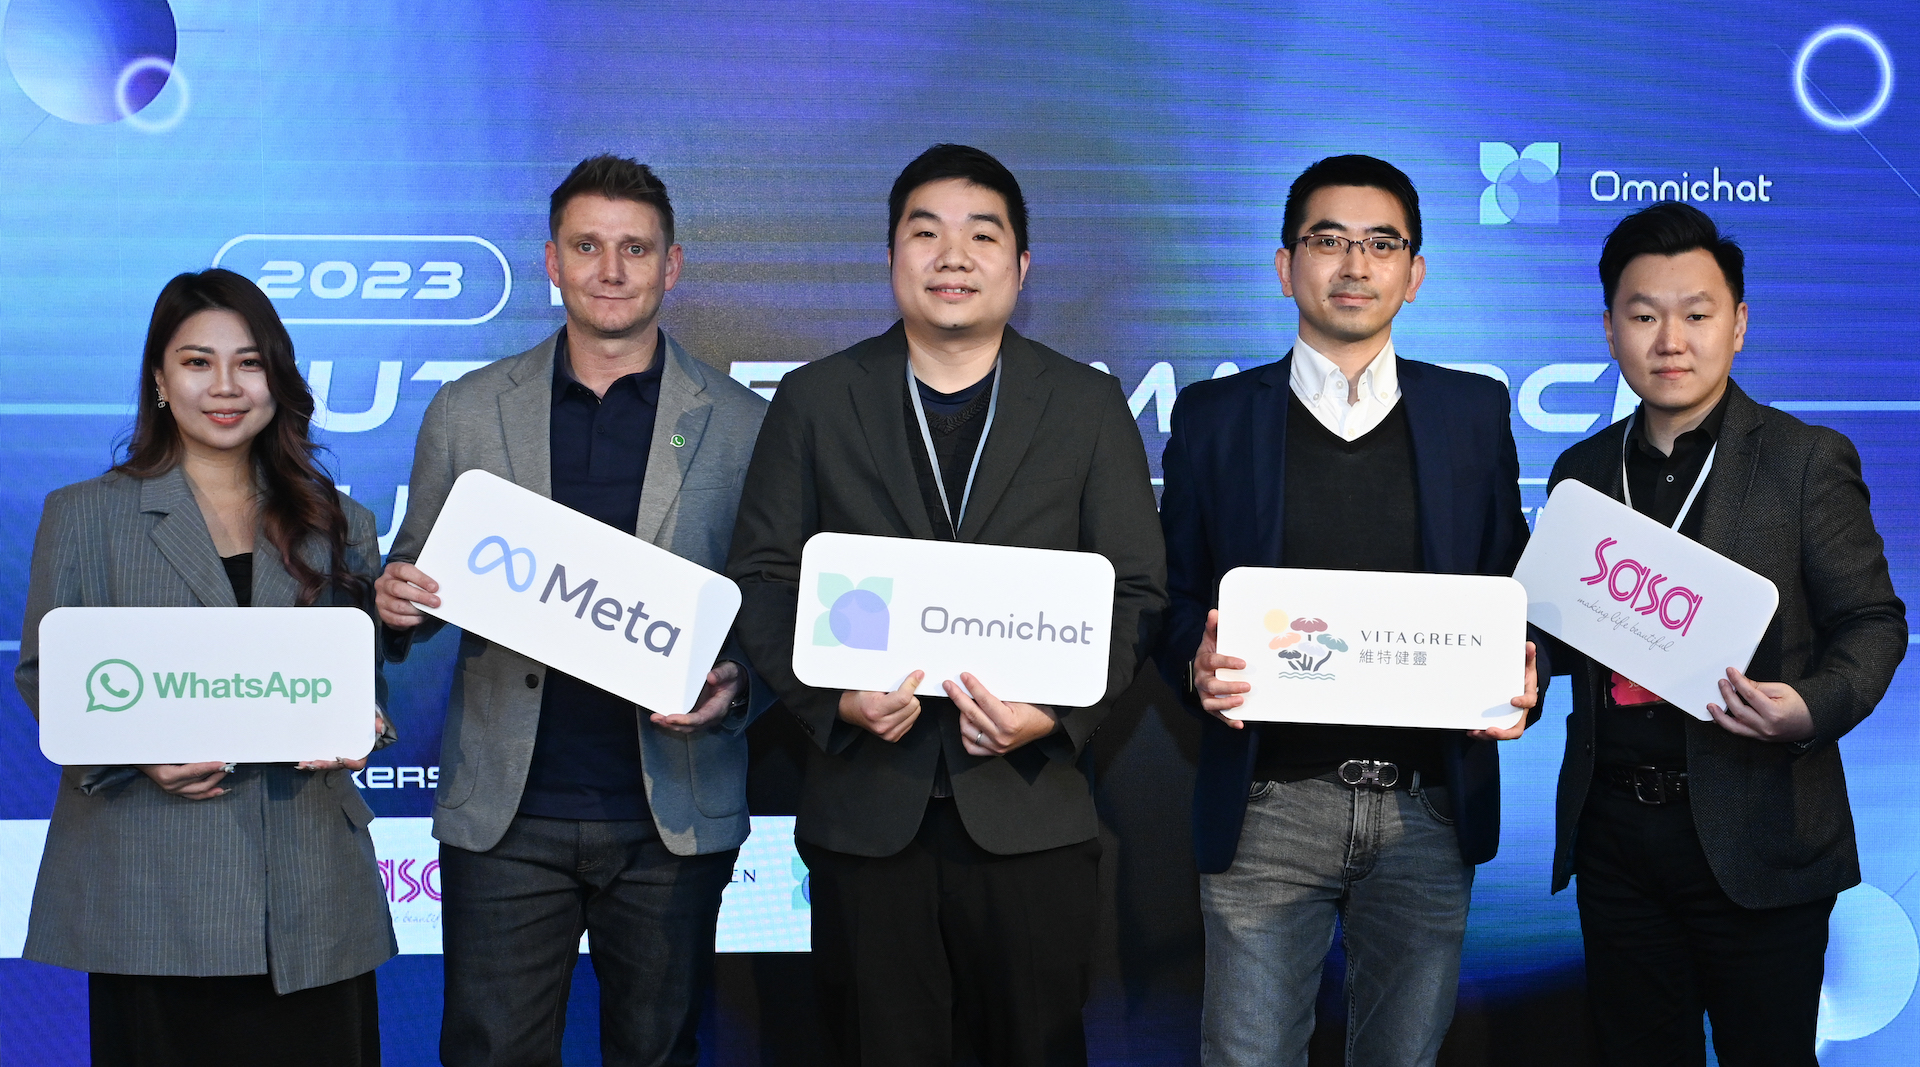 (from left) Claudia Chiu, Senior Strategic Partner Manager, Greater China Region of Meta; Adam Bowden, Partner Lead, GCR & Global Partners of Meta; Alan Chan, Founder and CEO of Omnichat; Terrence Siu, Head of IT of Vita Green; Hong Li, Director of eCommerce of Sa Sa.